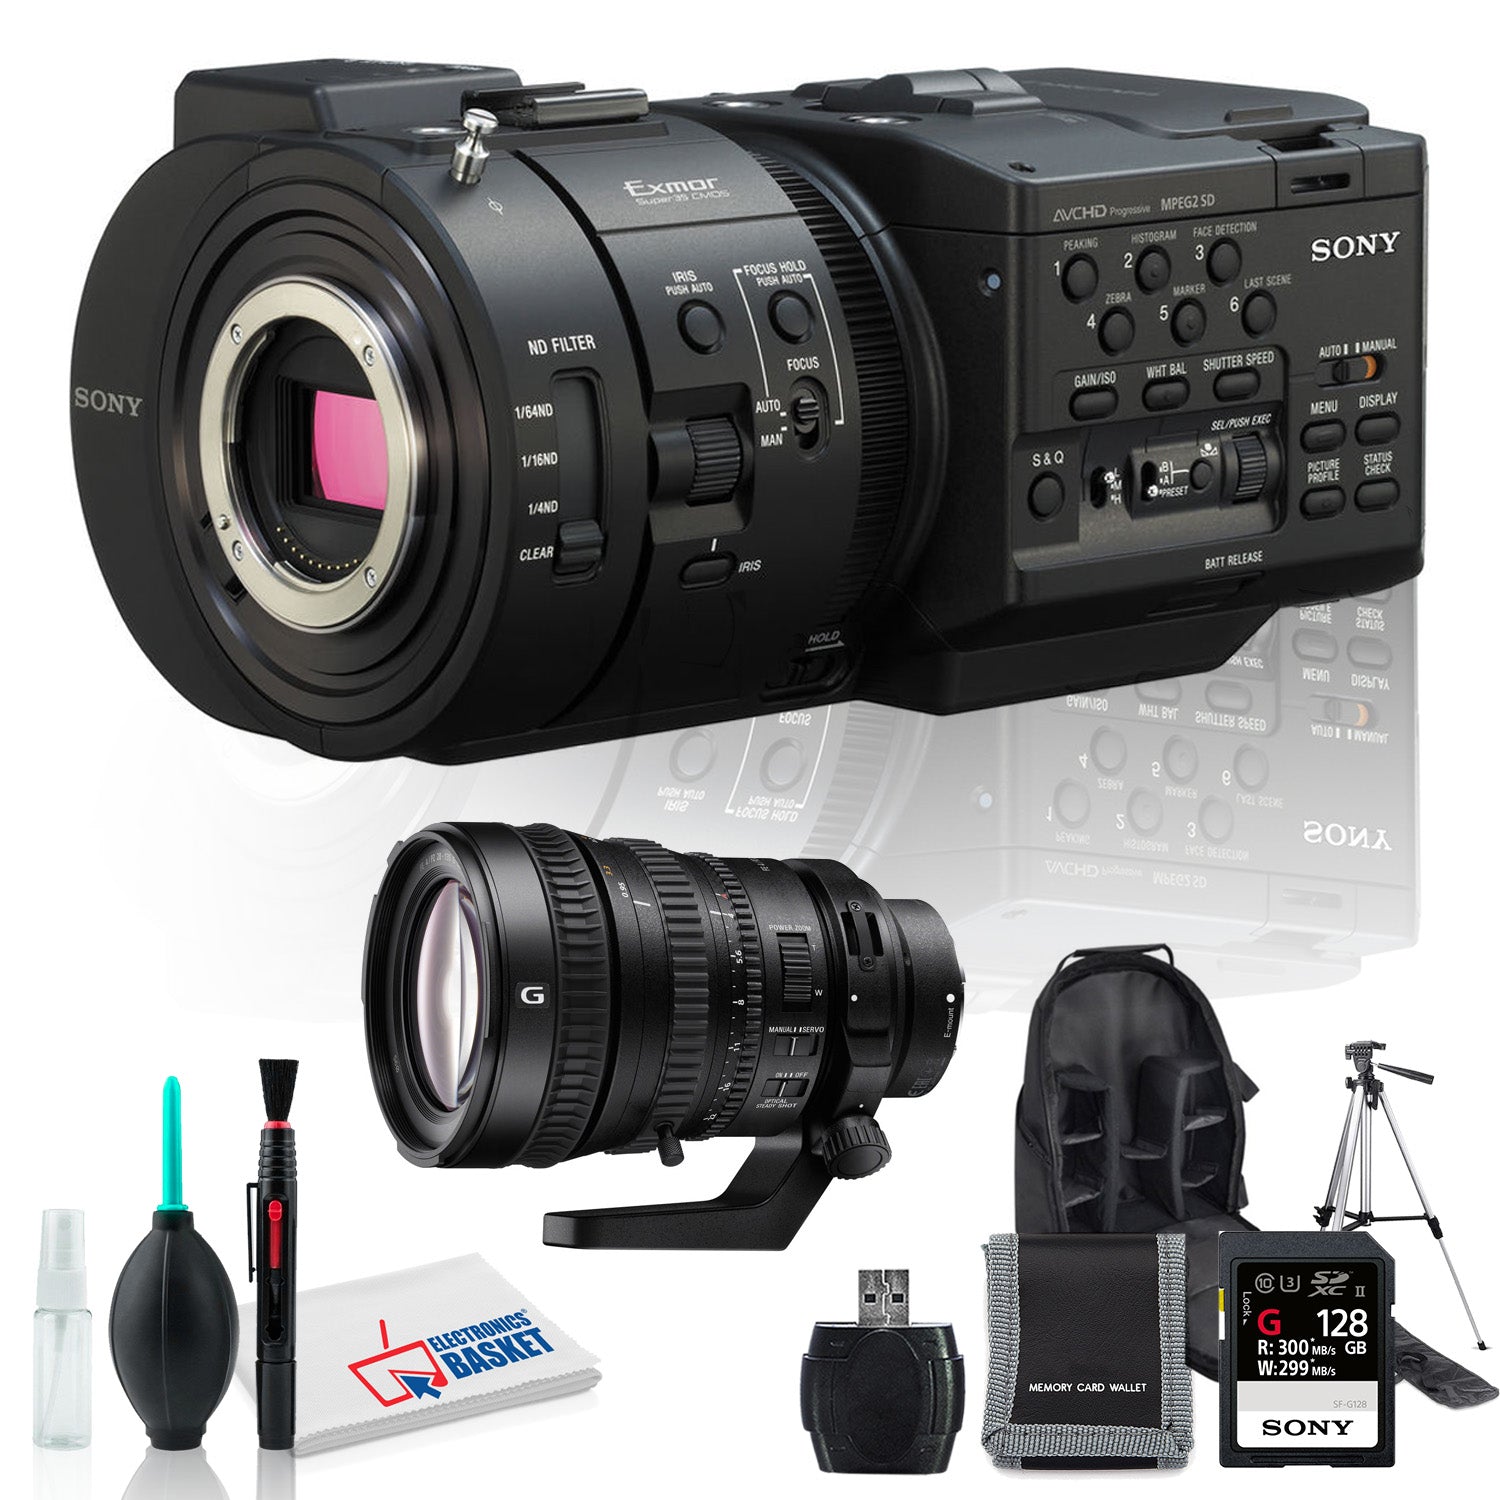 Sony NEX-FS700R Camcorder w/ Microfiber Cloth, Lens Cleaning Kit, 128GB Memory Kit, and Sony PZ 28-135mm f/4 G OSS Lens